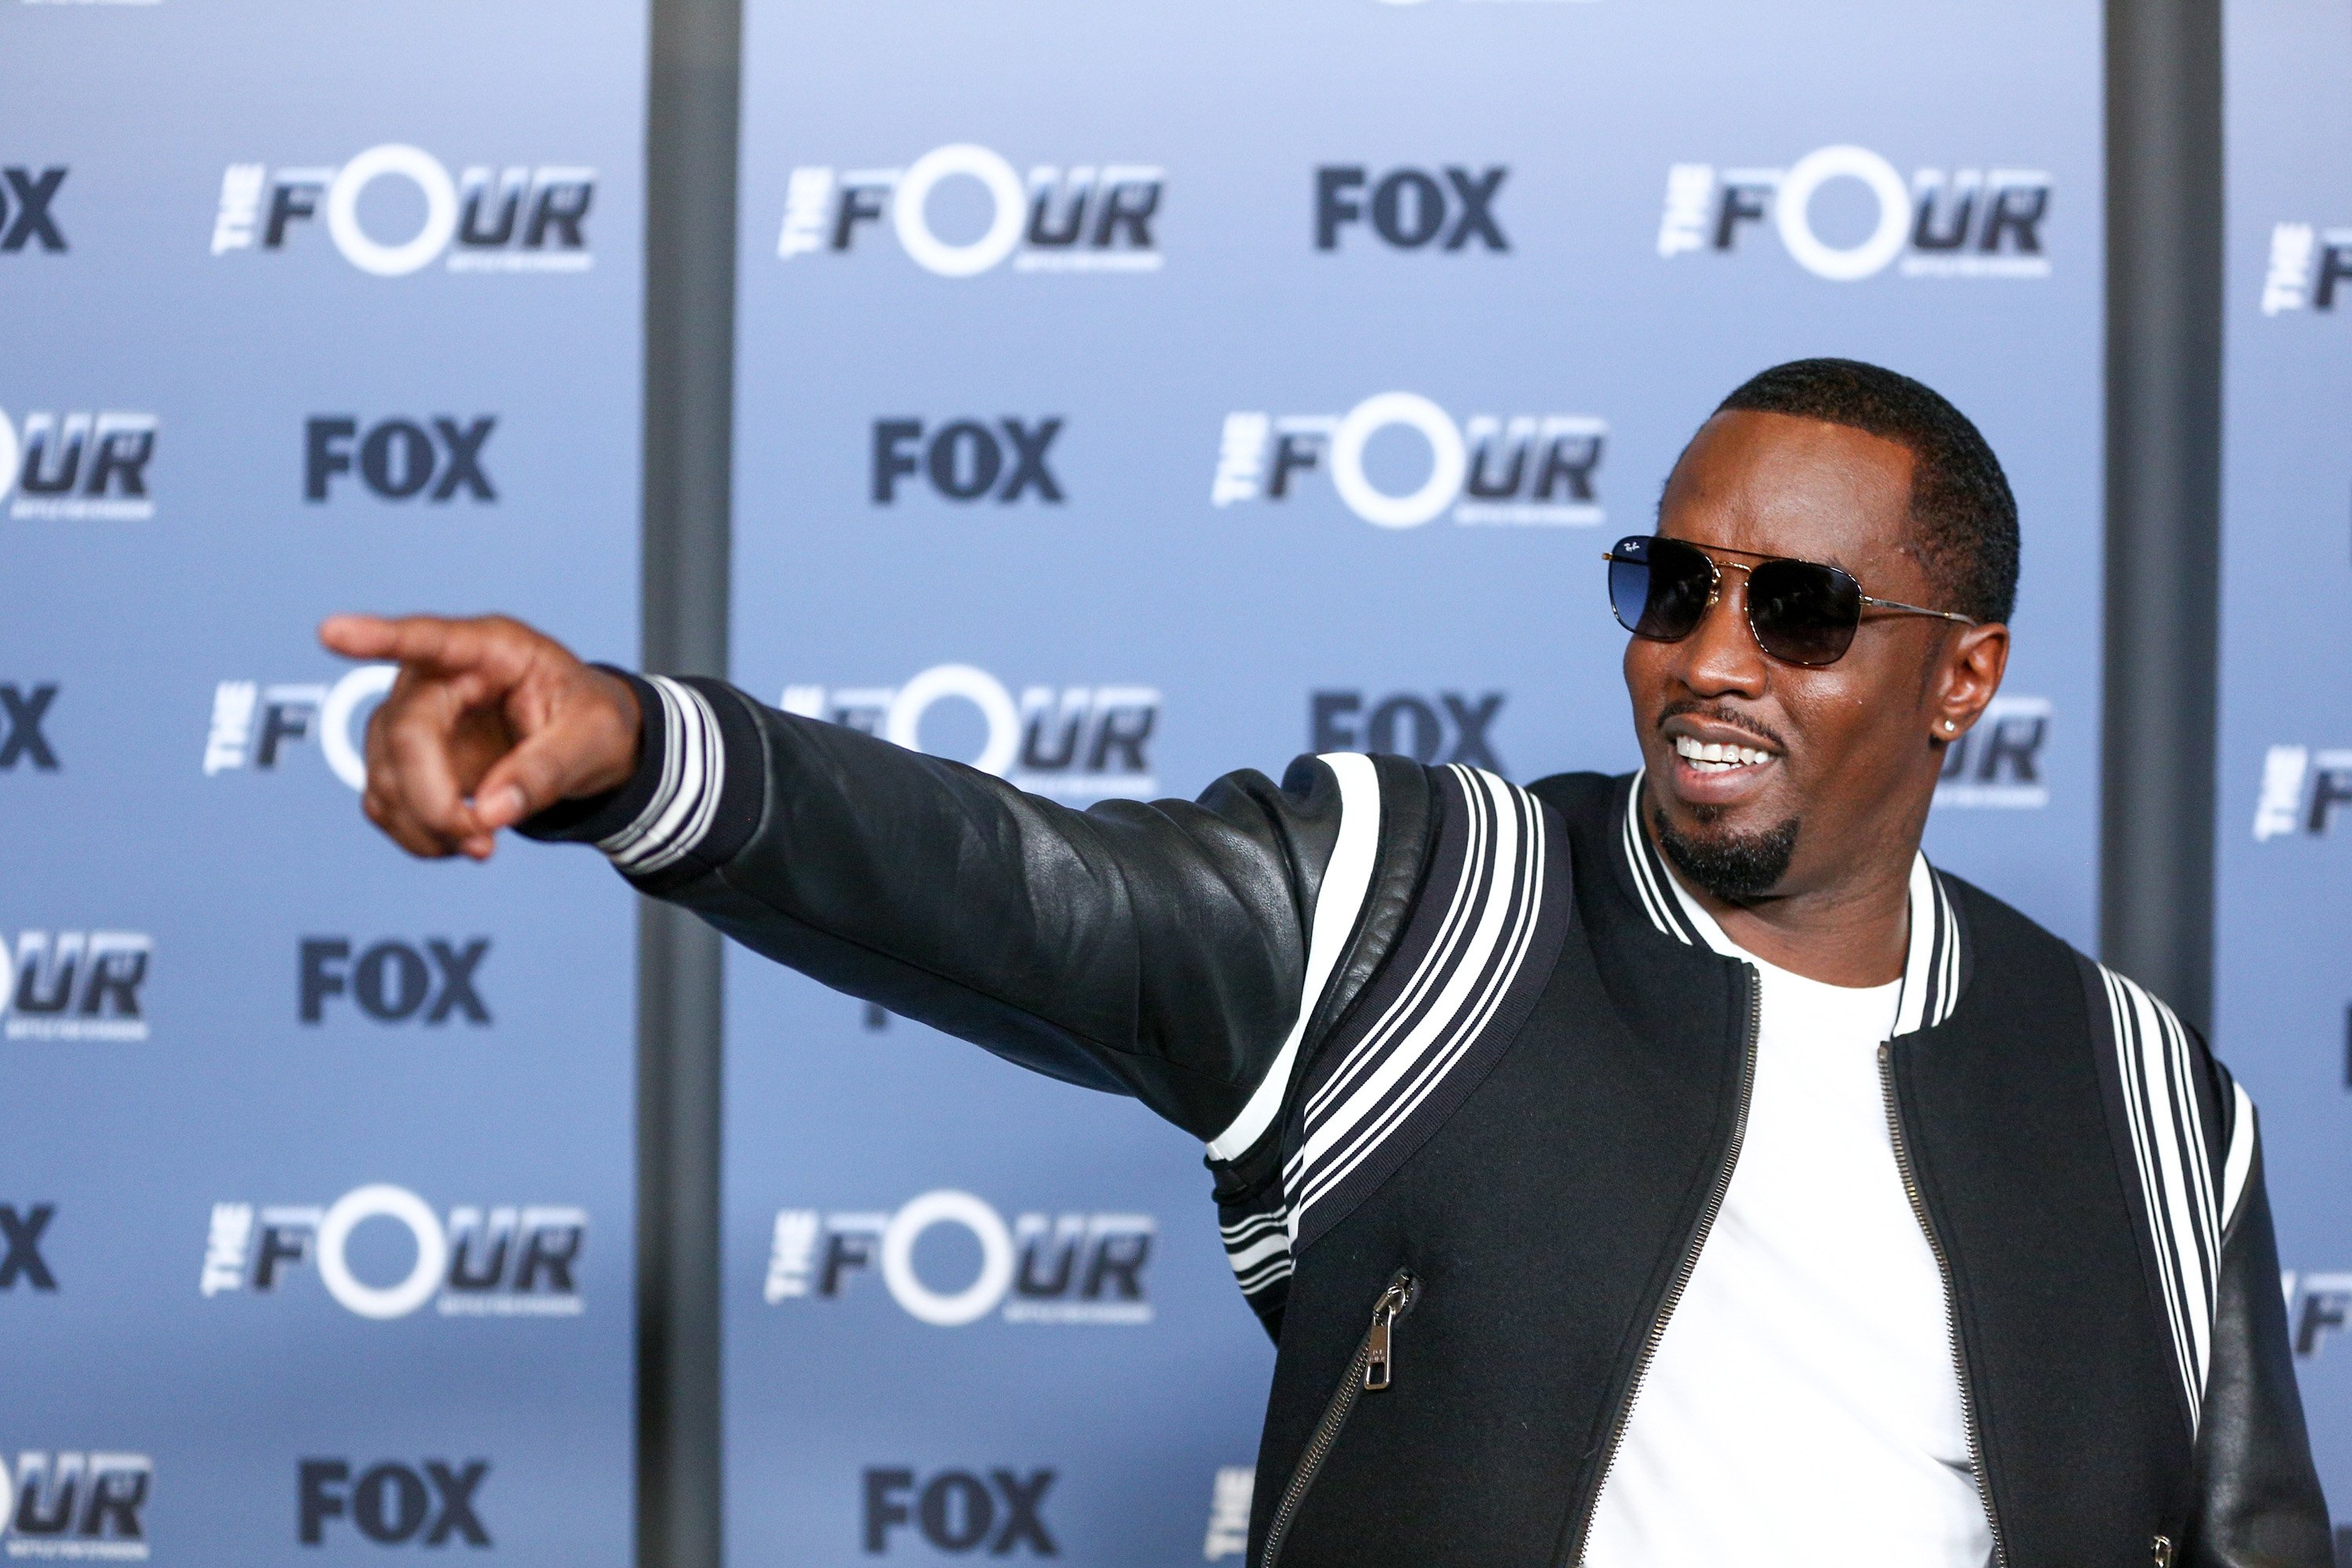 Sean Combs at the premiere of "The Four: Battle For Stardom" Season 2 at CBS Studios - Radford on May 30, 2018 in Studio City, California. | Source: Getty Images